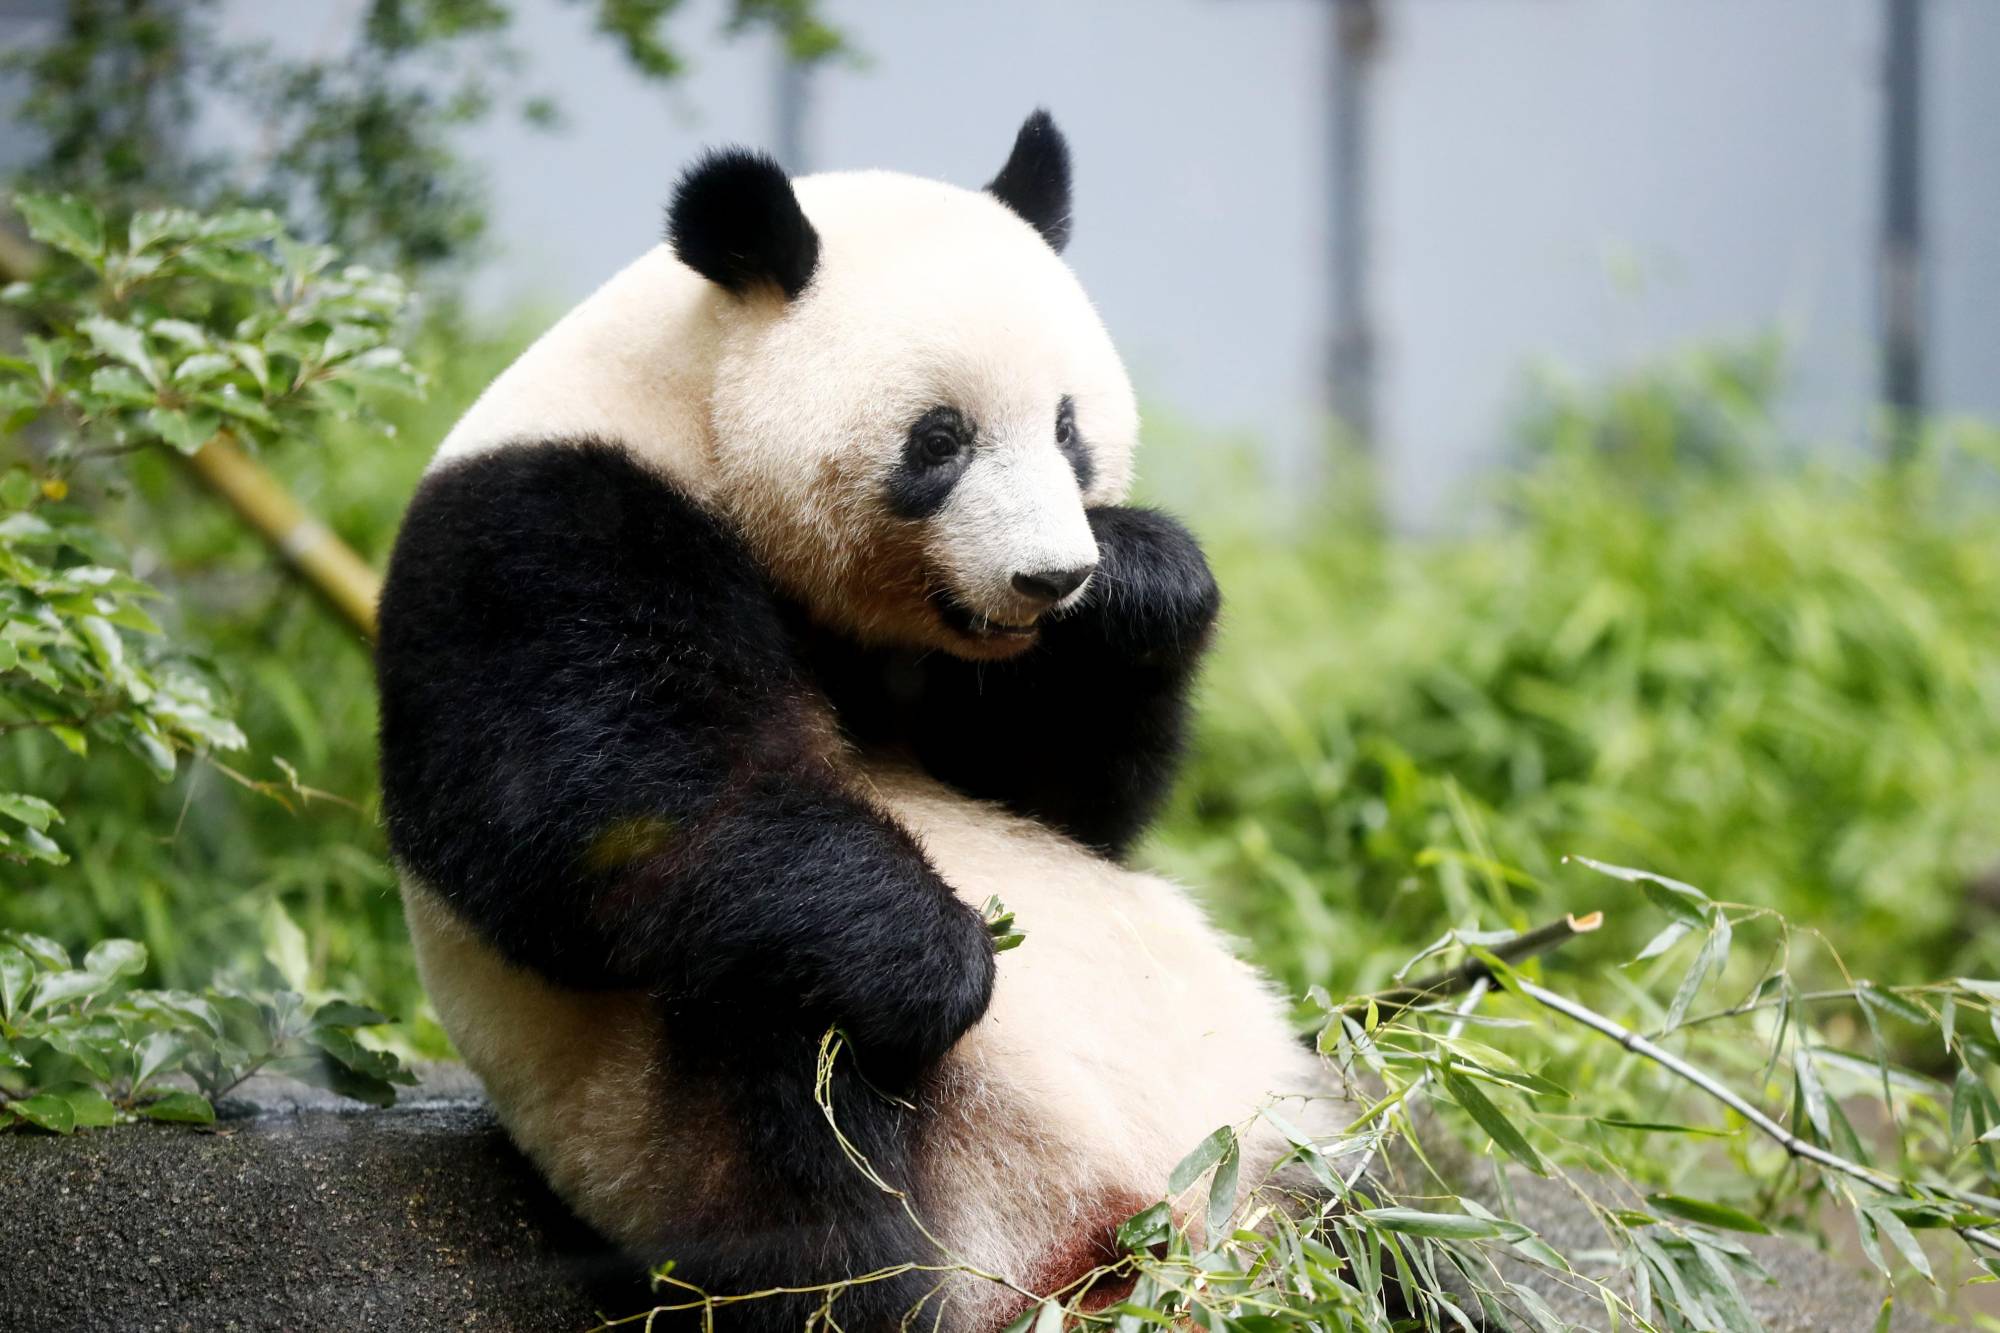 Theory suggests China gave pandas to Japan in 7th century | The Japan Times